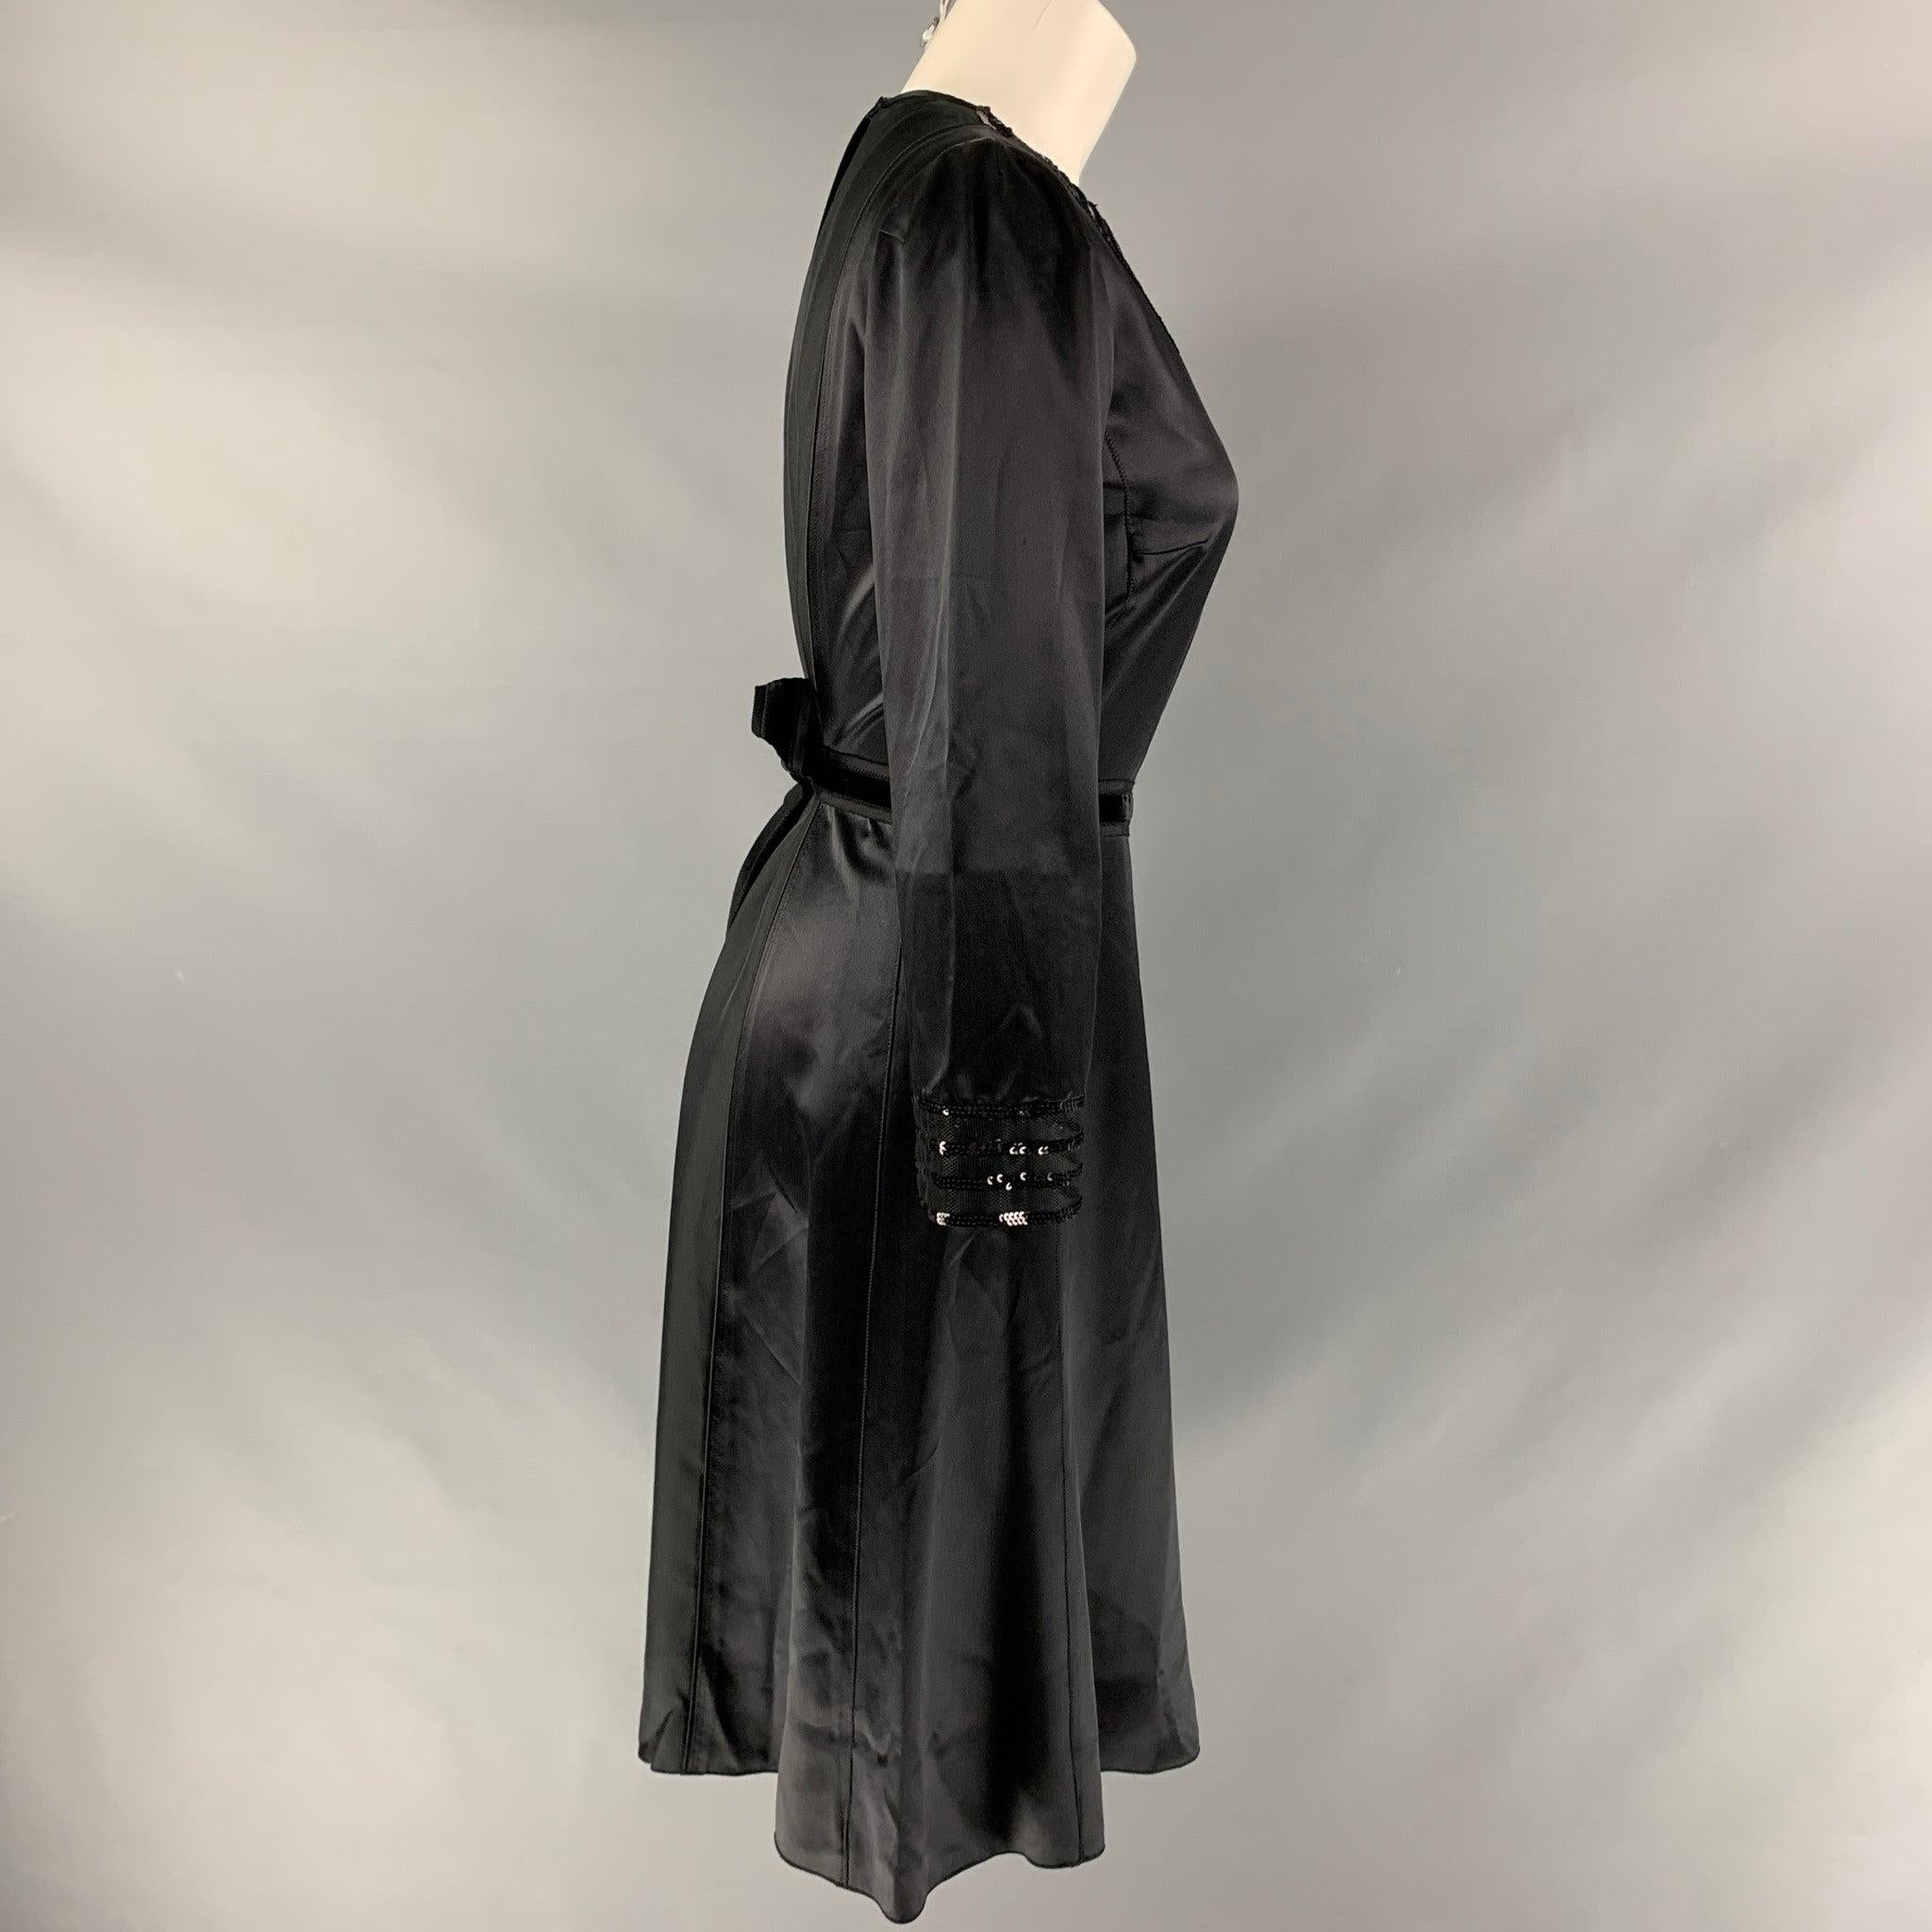 MARC JACOBS long sleeve dress comes in a black silk fabric featuring a tulle panel collar detail, sequin trims, back zip- up closure and velvet tie at back.Excellent Pre-Owned Condition. 
 

 Marked:  4 
 

 Measurements: 
  
 Shoulder: 14 inches